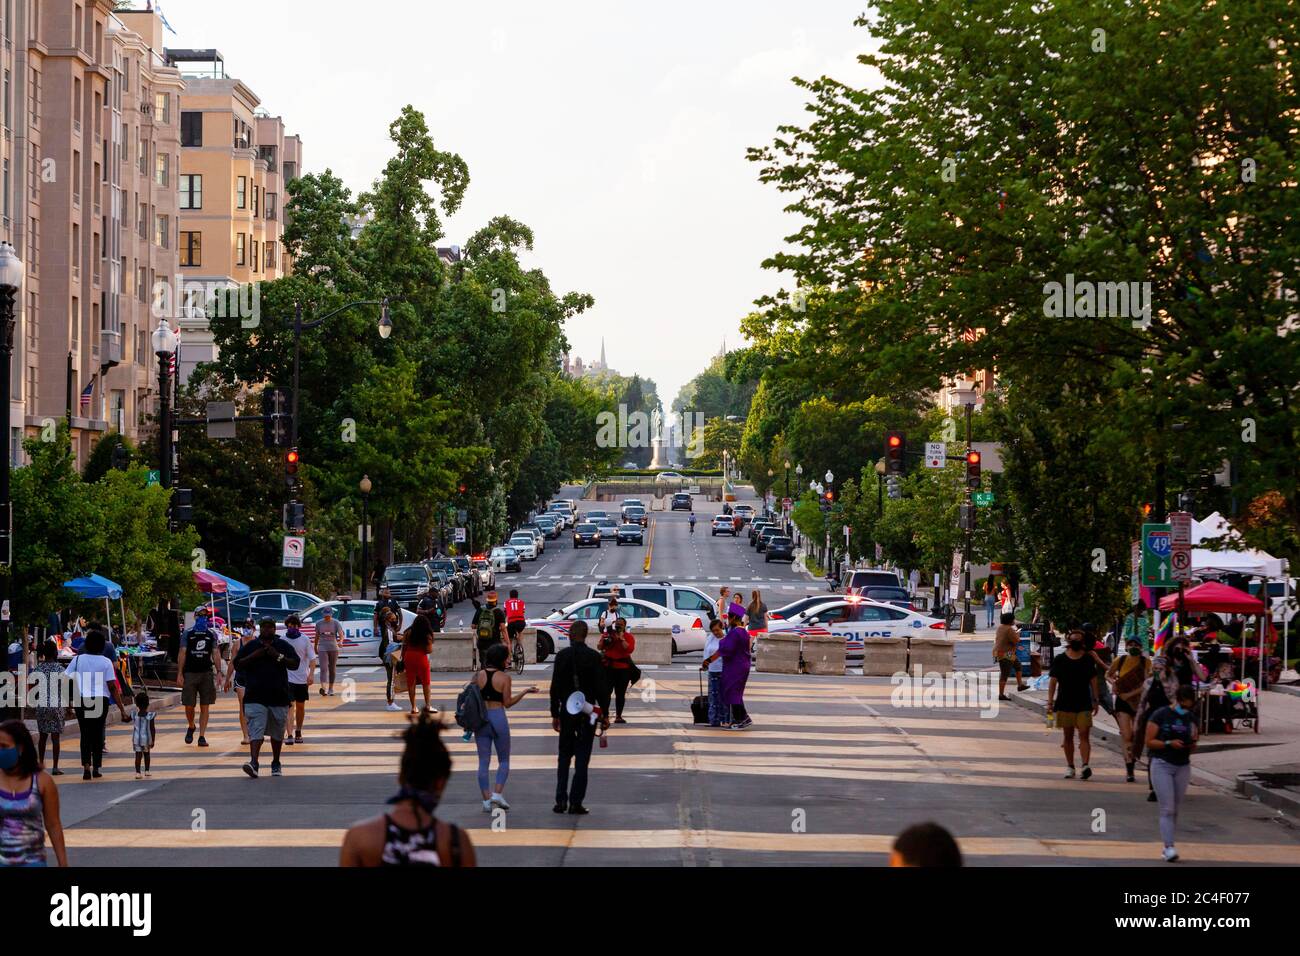 View of Scott Circle and protesters at Black Lives Matter Plaza on a summer evening, Washington, DC, United States Stock Photo